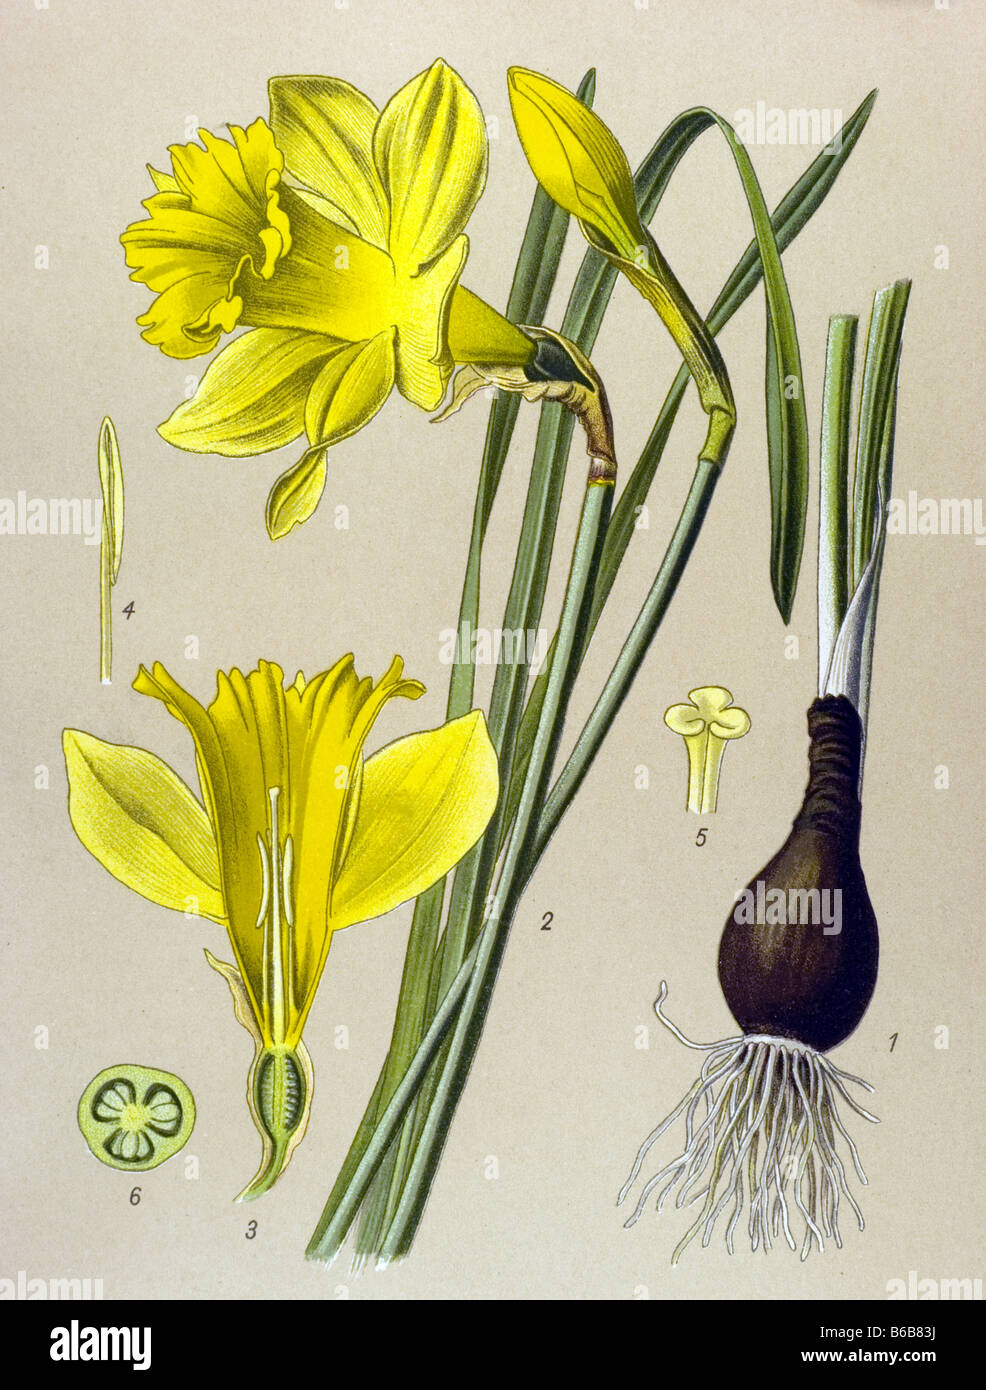 Wild daffodil, Narcissus pseudonarcissus, poisonous plants illustrations Stock Photo